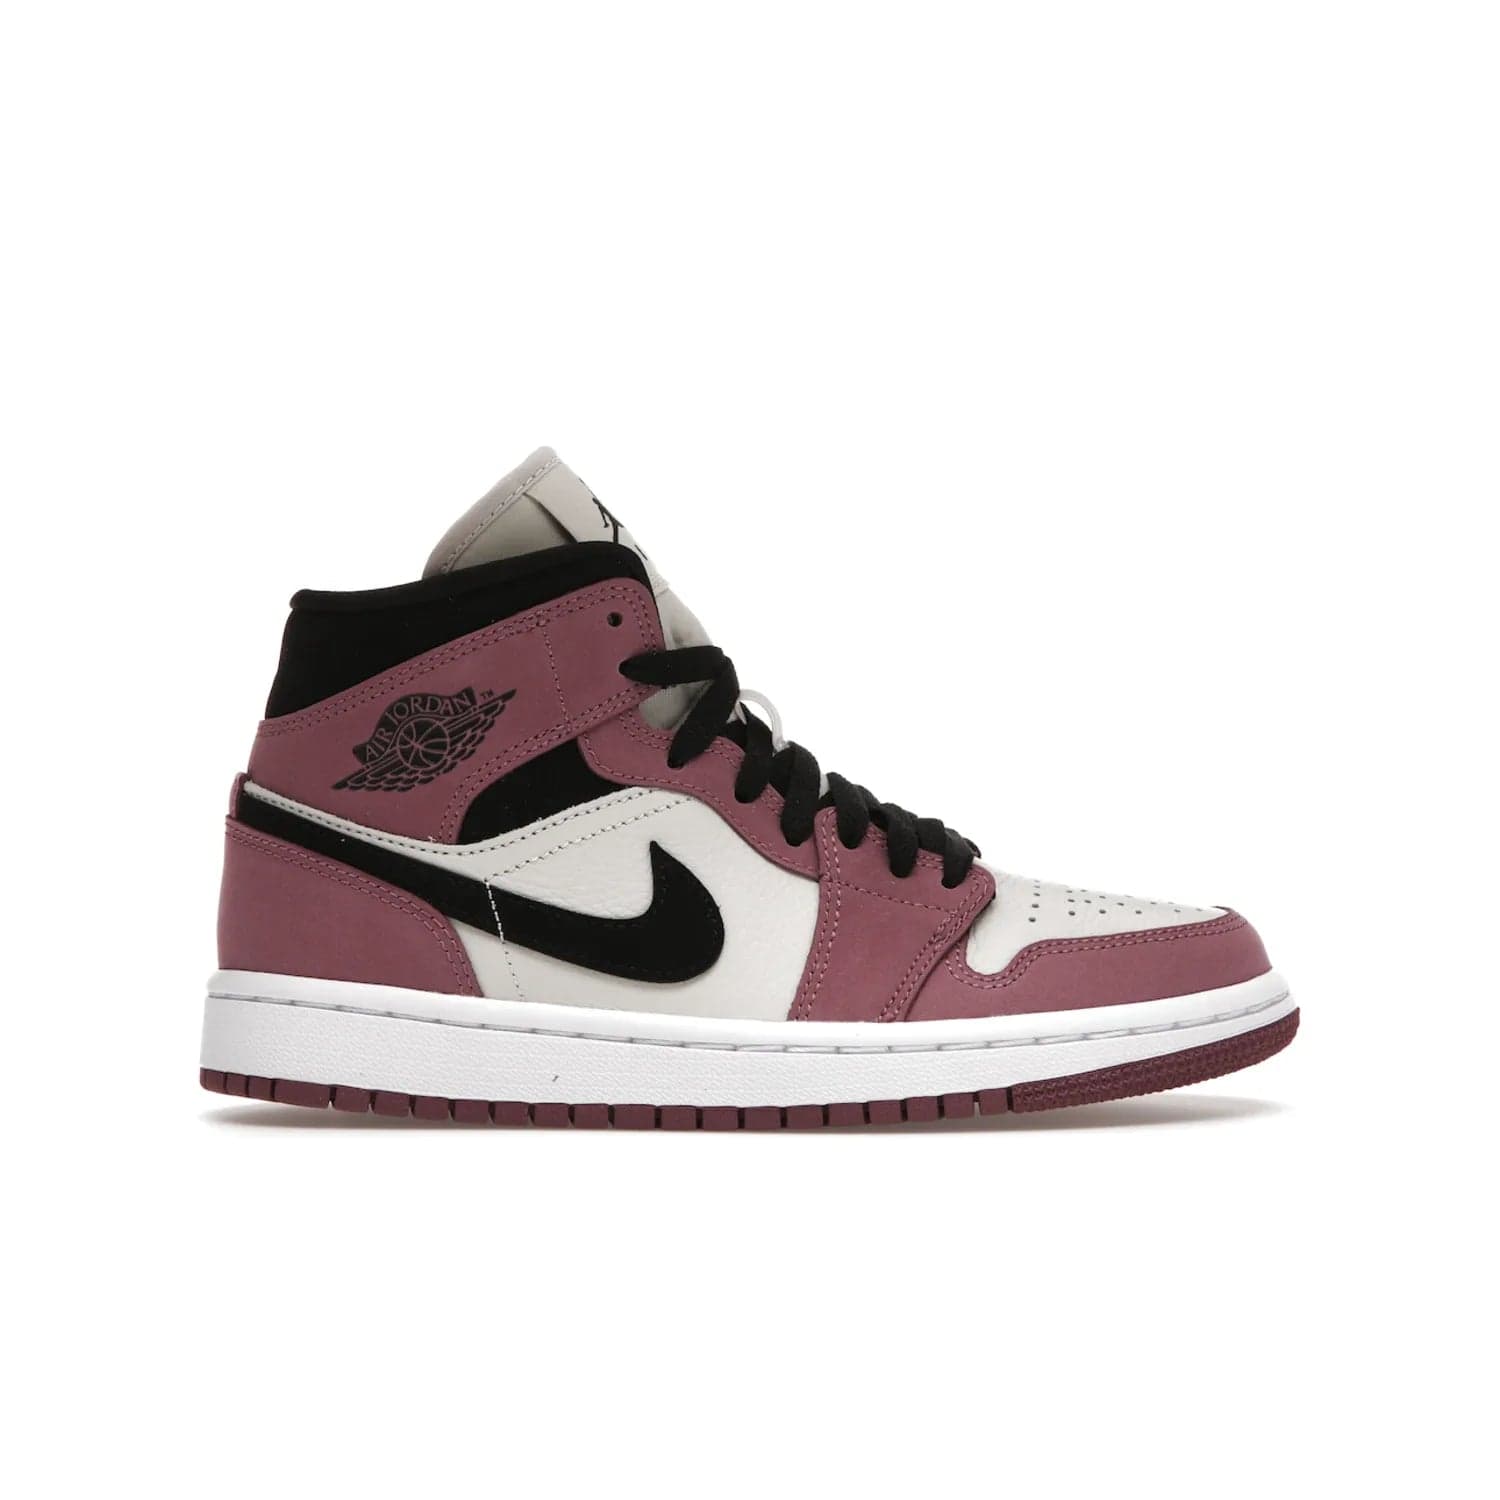 Jordan 1 Mid SE Light Mulberry (Women's) - Image 1 - Only at www.BallersClubKickz.com - Classic style meets performance with the Air Jordan 1 Mid Light Mulberry (Women's). Sleek leather overlays and light bone detailing bring out the best of this classic sneaker, perfect for the active woman on-the-go. Available March 2022.